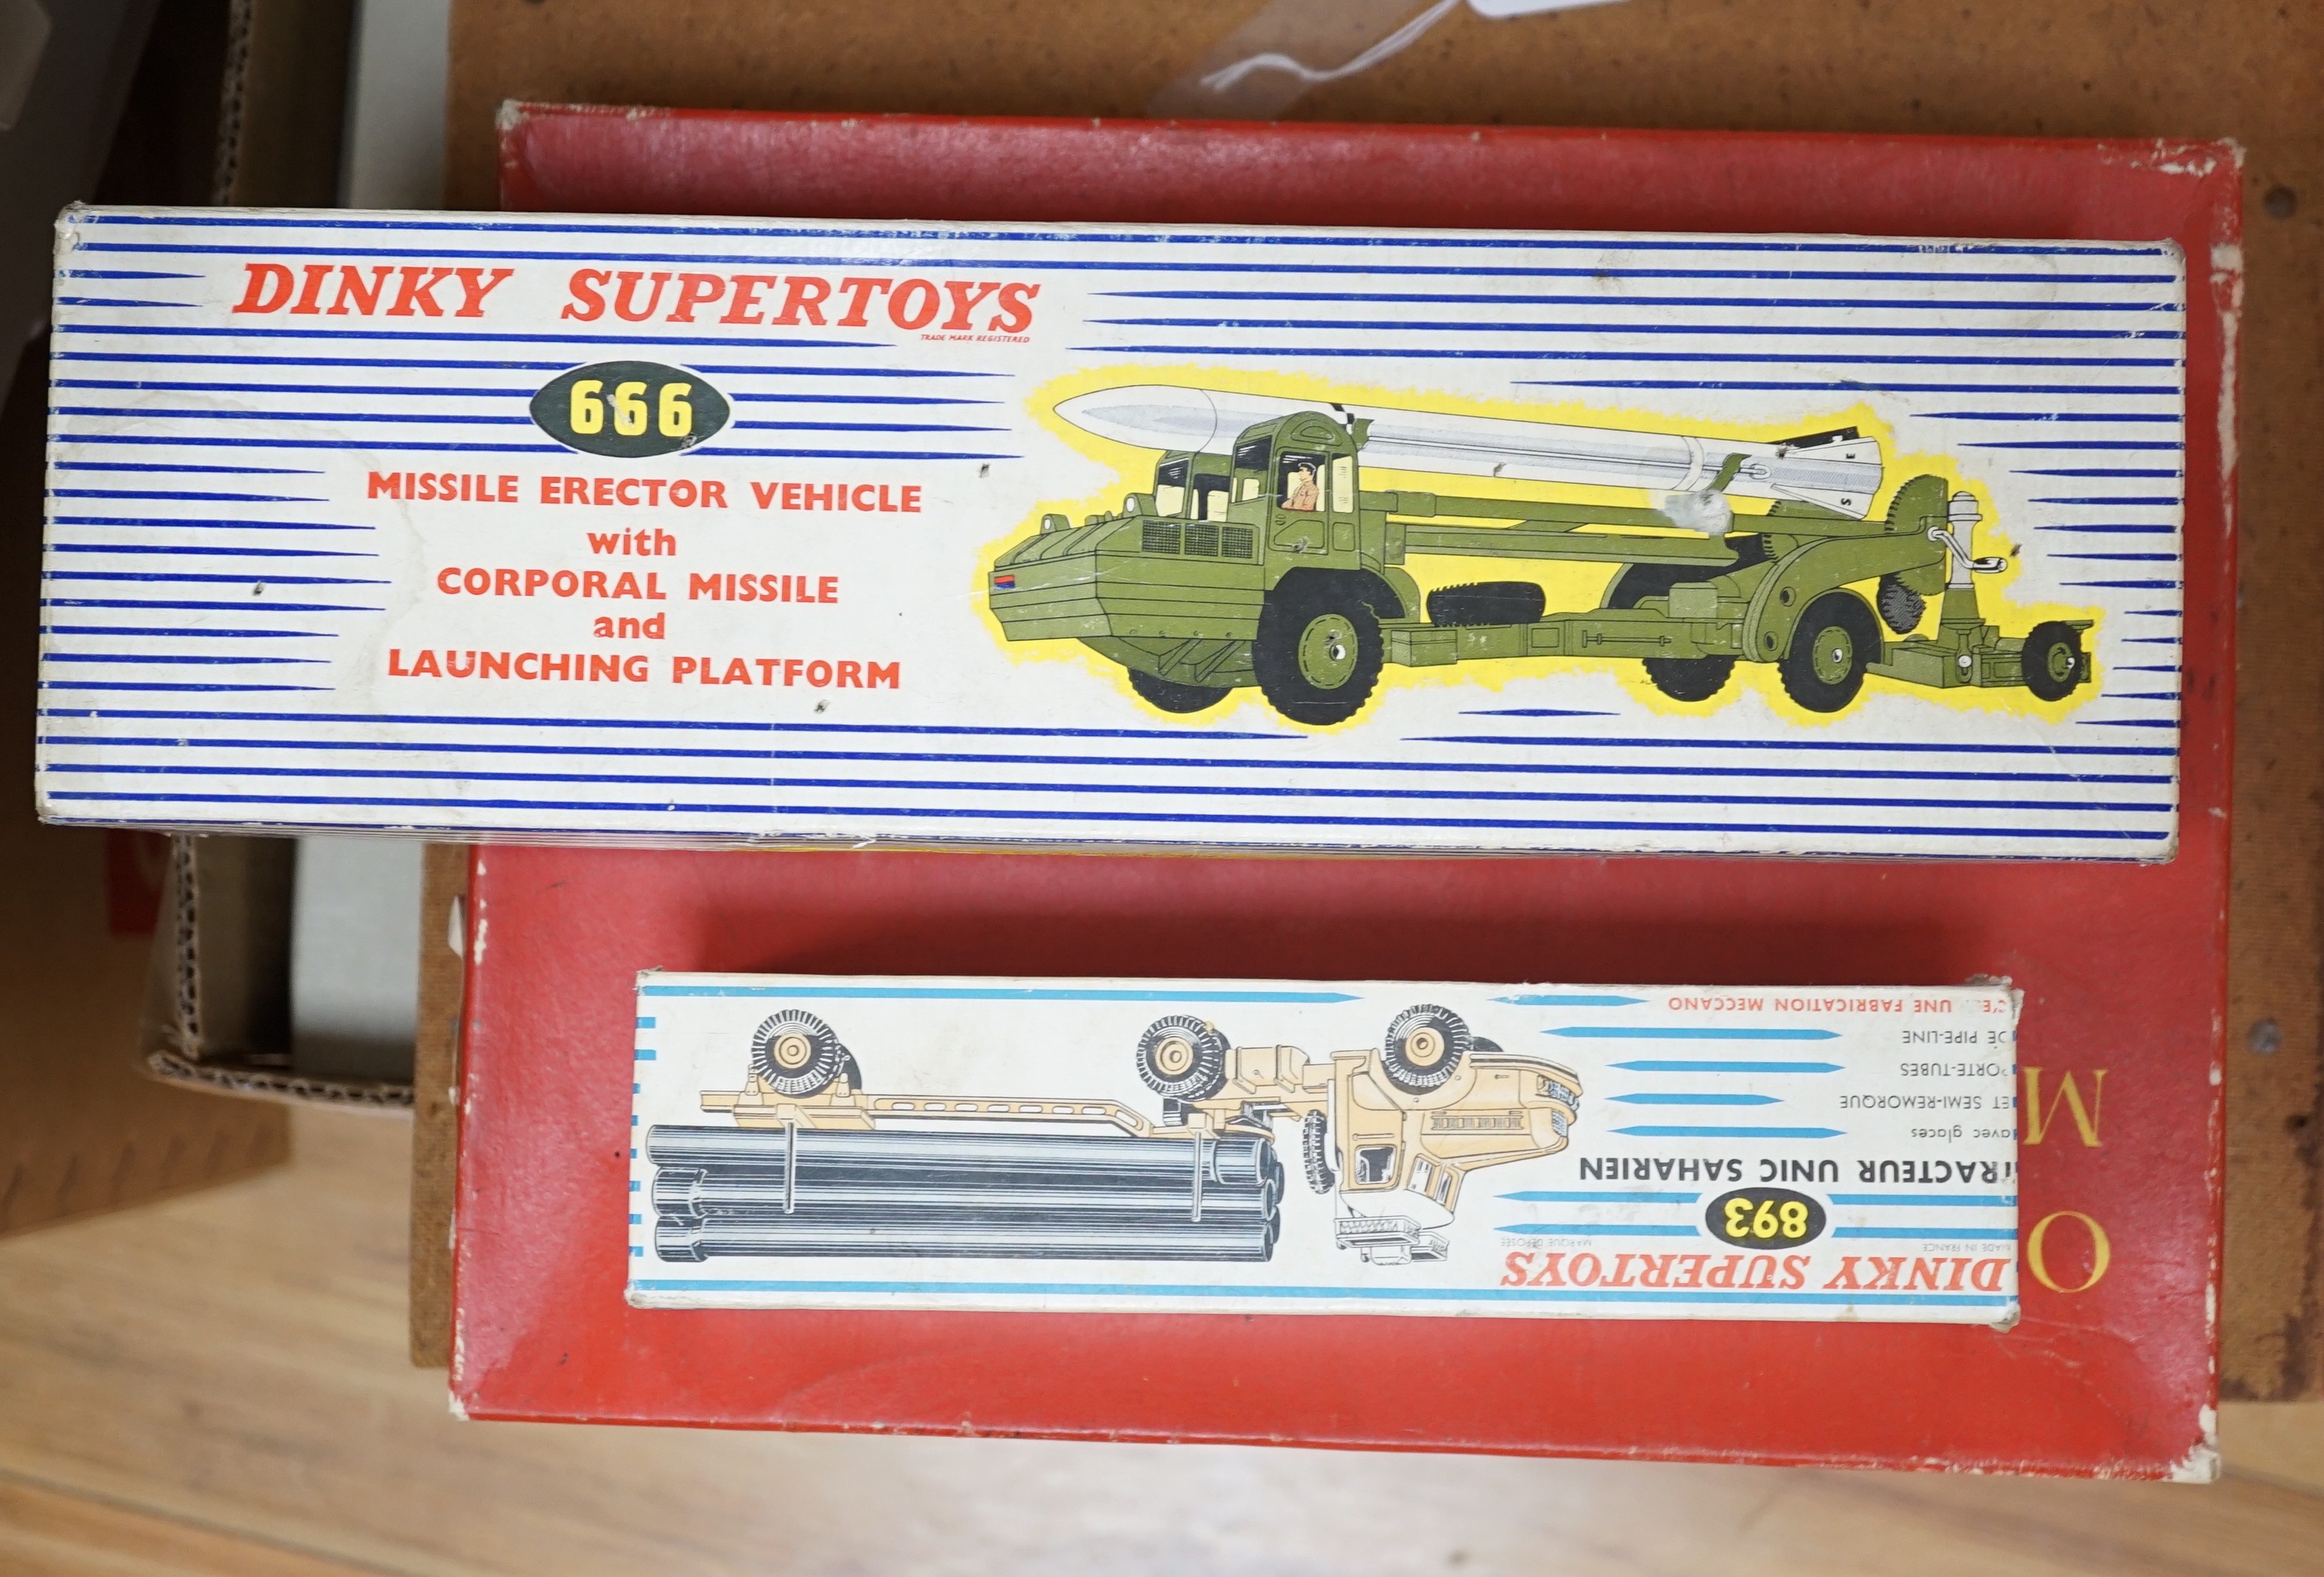 Two Dinky Toys (666 and 893) together with Hornby and Triang train sets